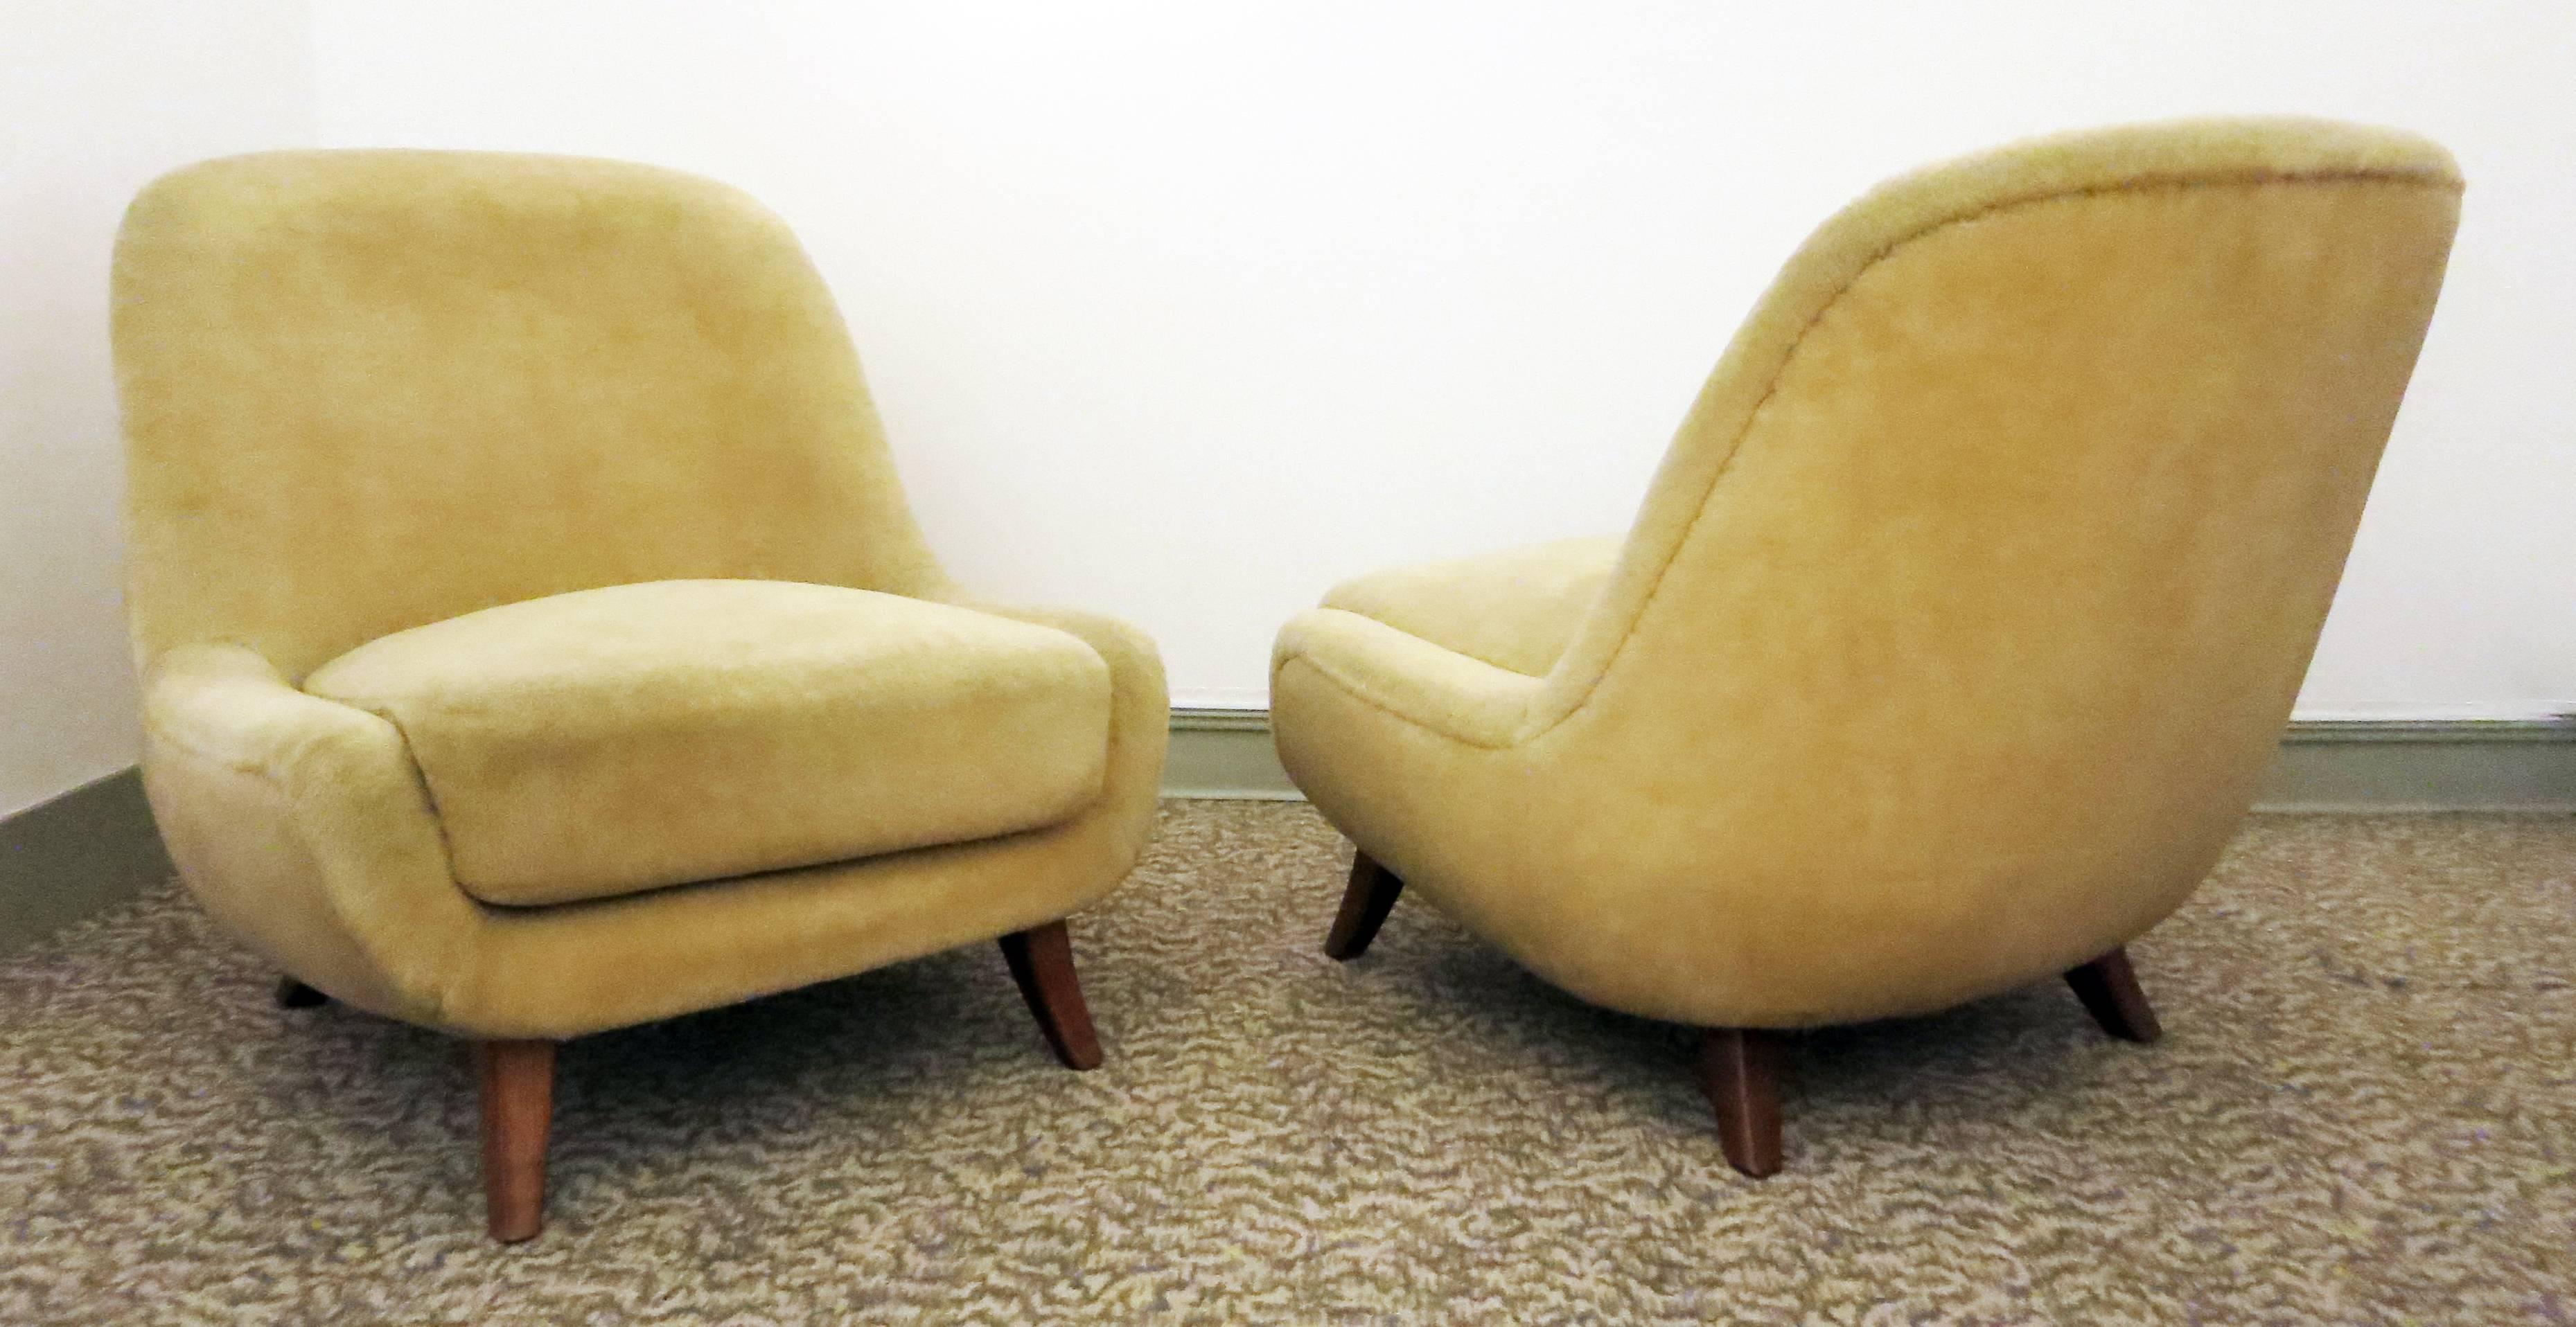 Huge and very comfortable pair of chairs by Bergmann from the 1950s.
Great very round shape.
Solid teak legs. Original light yellow fur velvet.